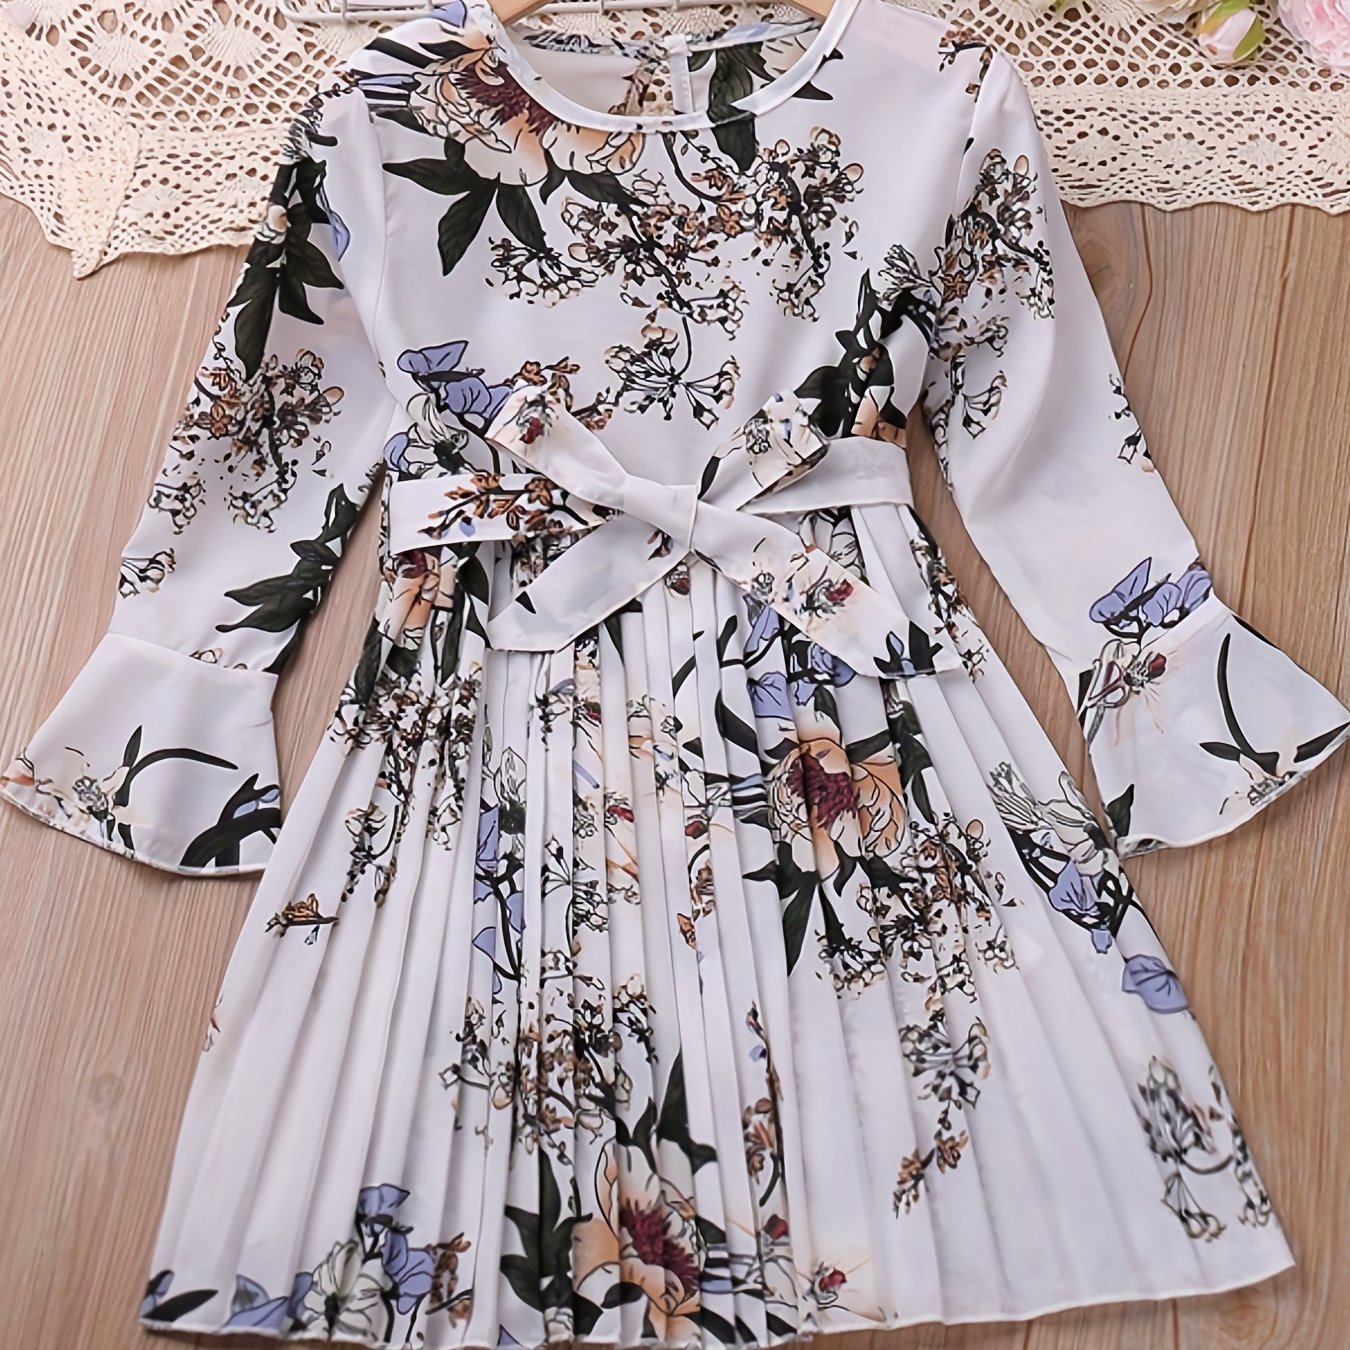 little girls boho floral flare long sleeve casual pleated dress for party going out kids spring fall clothes  